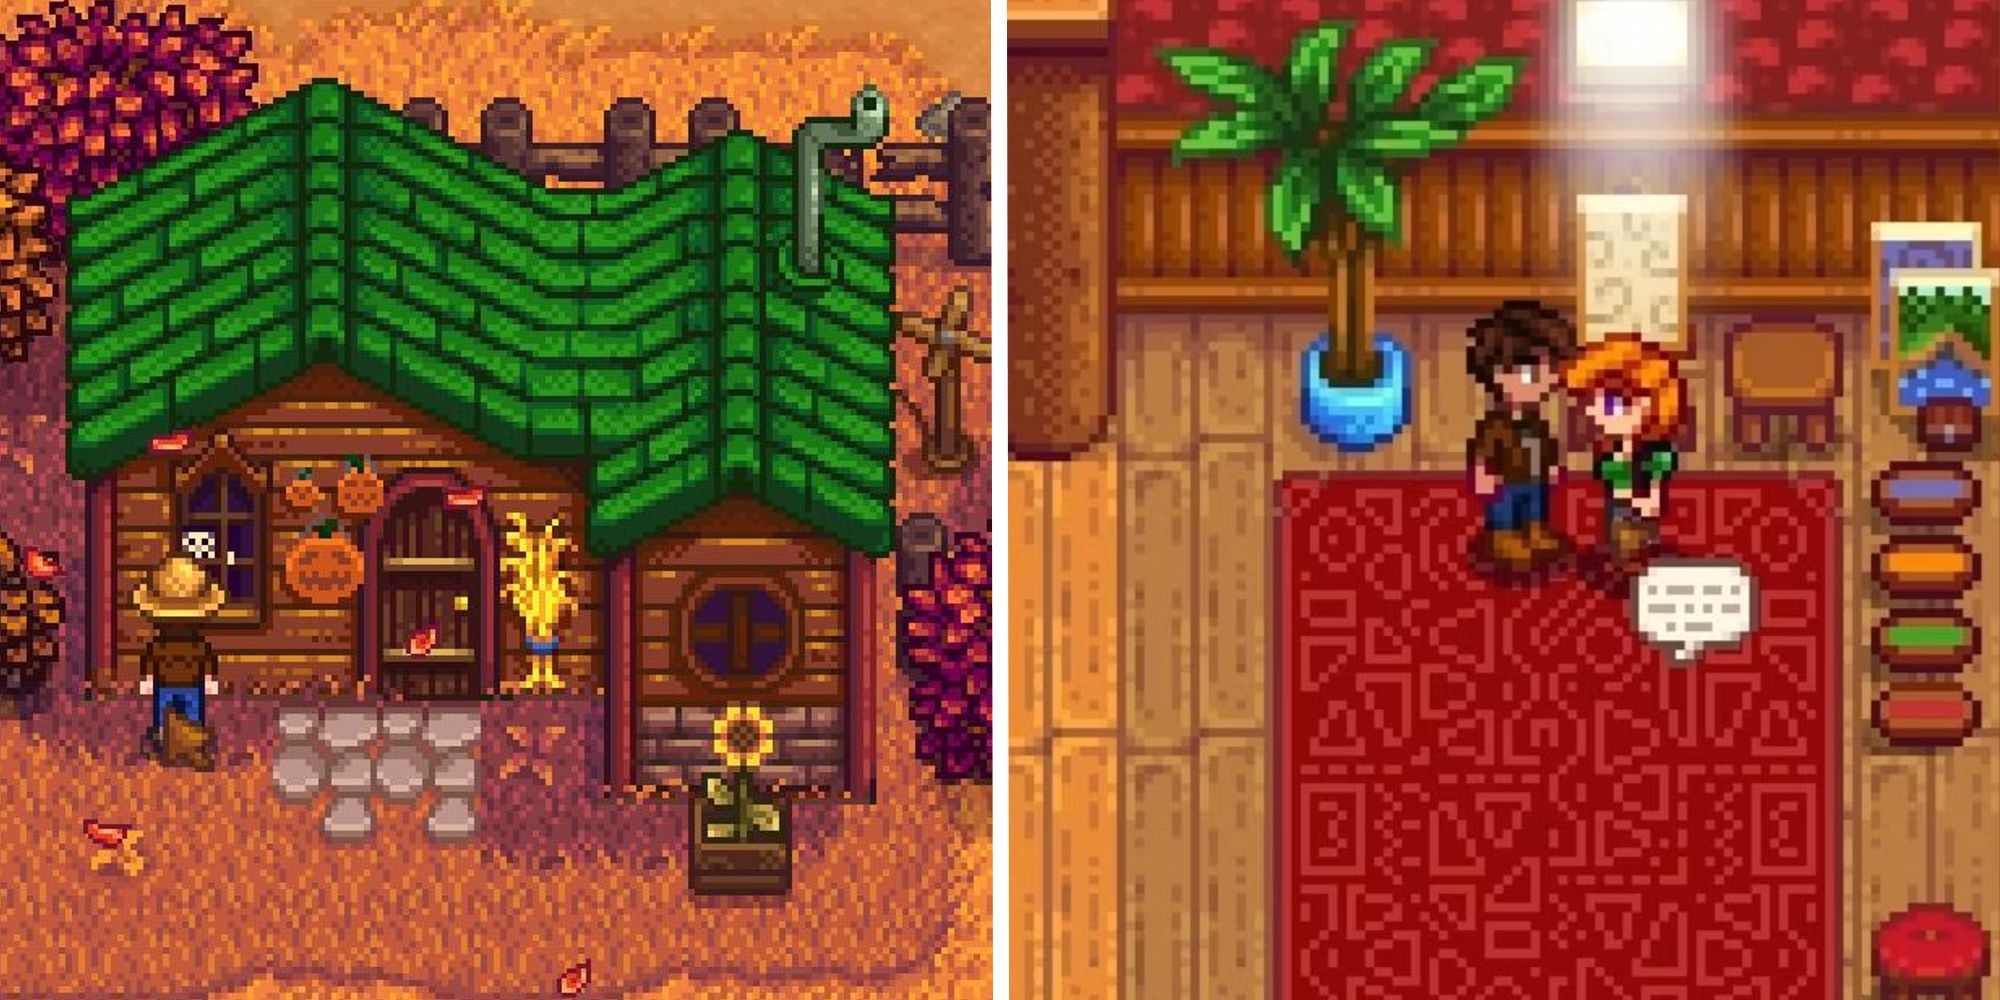 split image showing leahs house, next to image of leah in her spouse room